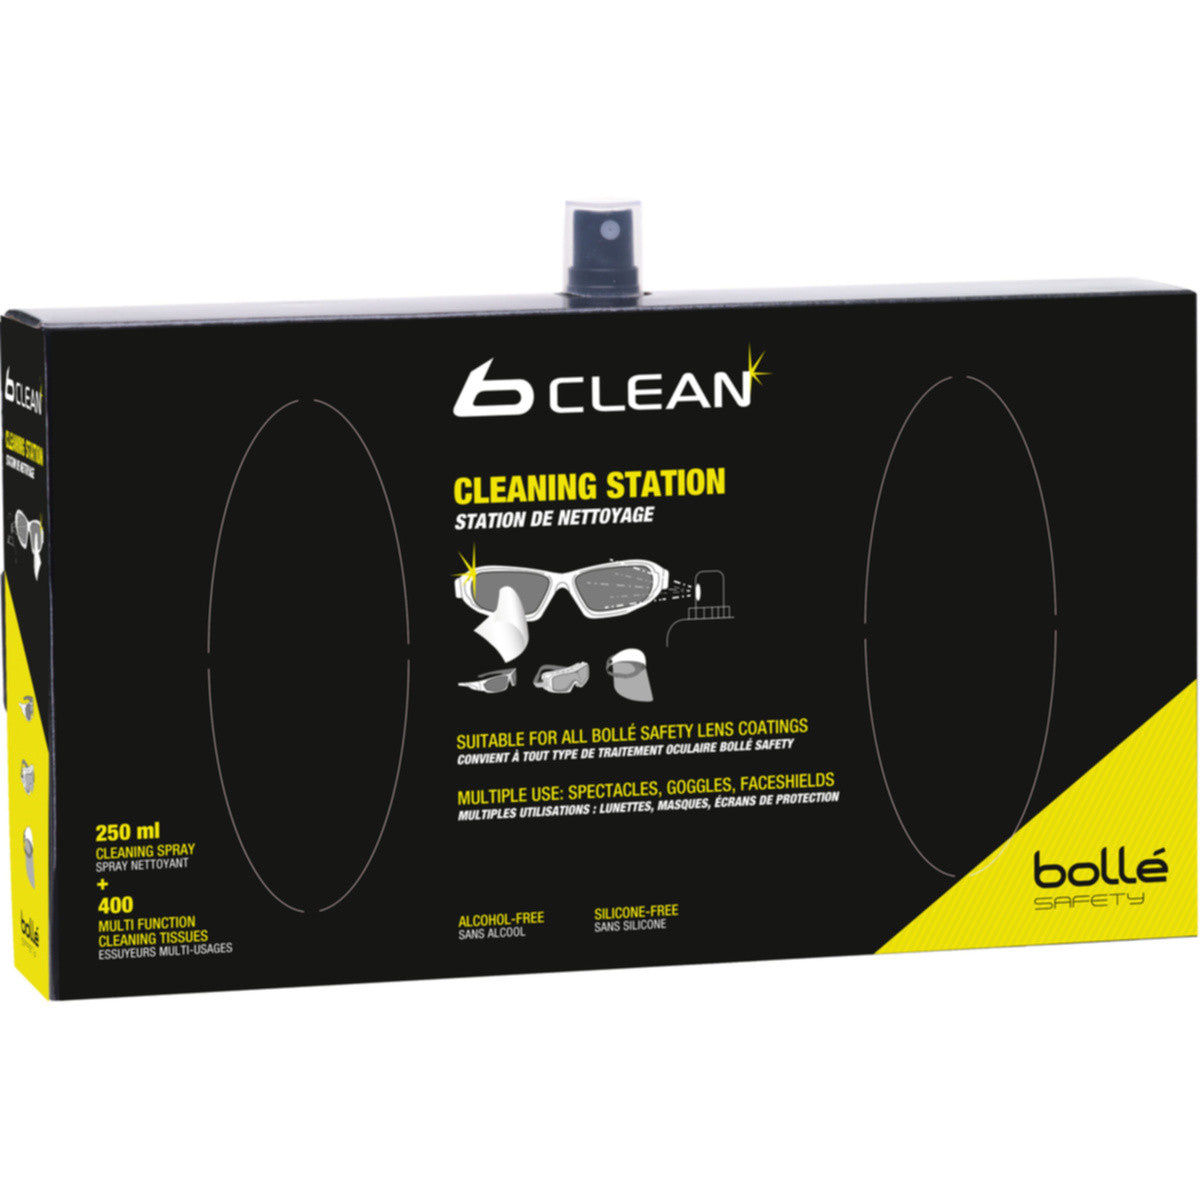 Bollé Safety Carton Cleaning Station